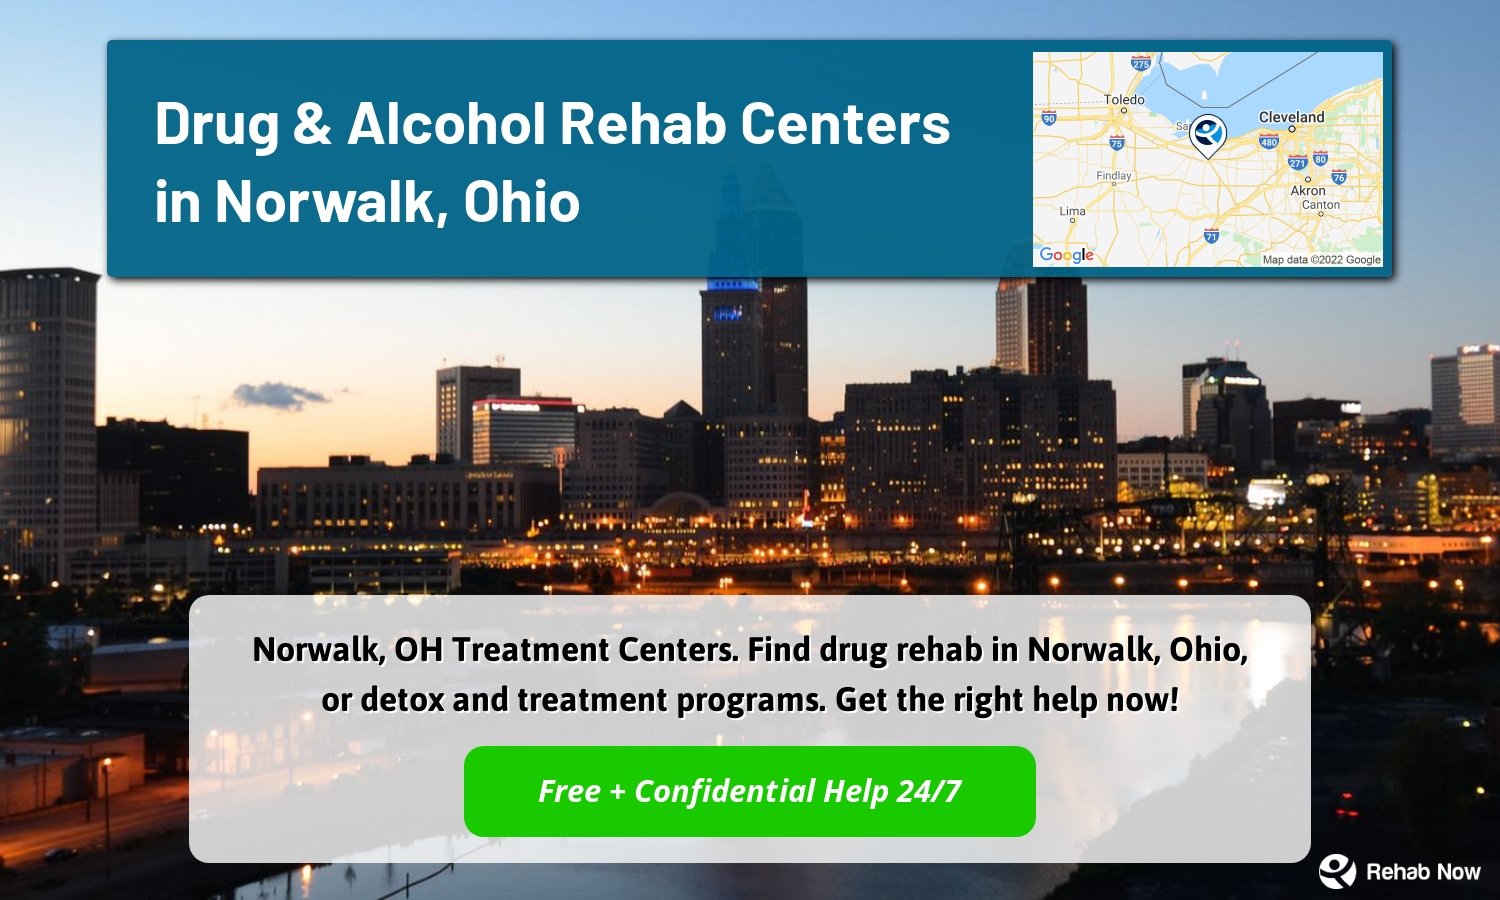 Norwalk, OH Treatment Centers. Find drug rehab in Norwalk, Ohio, or detox and treatment programs. Get the right help now!